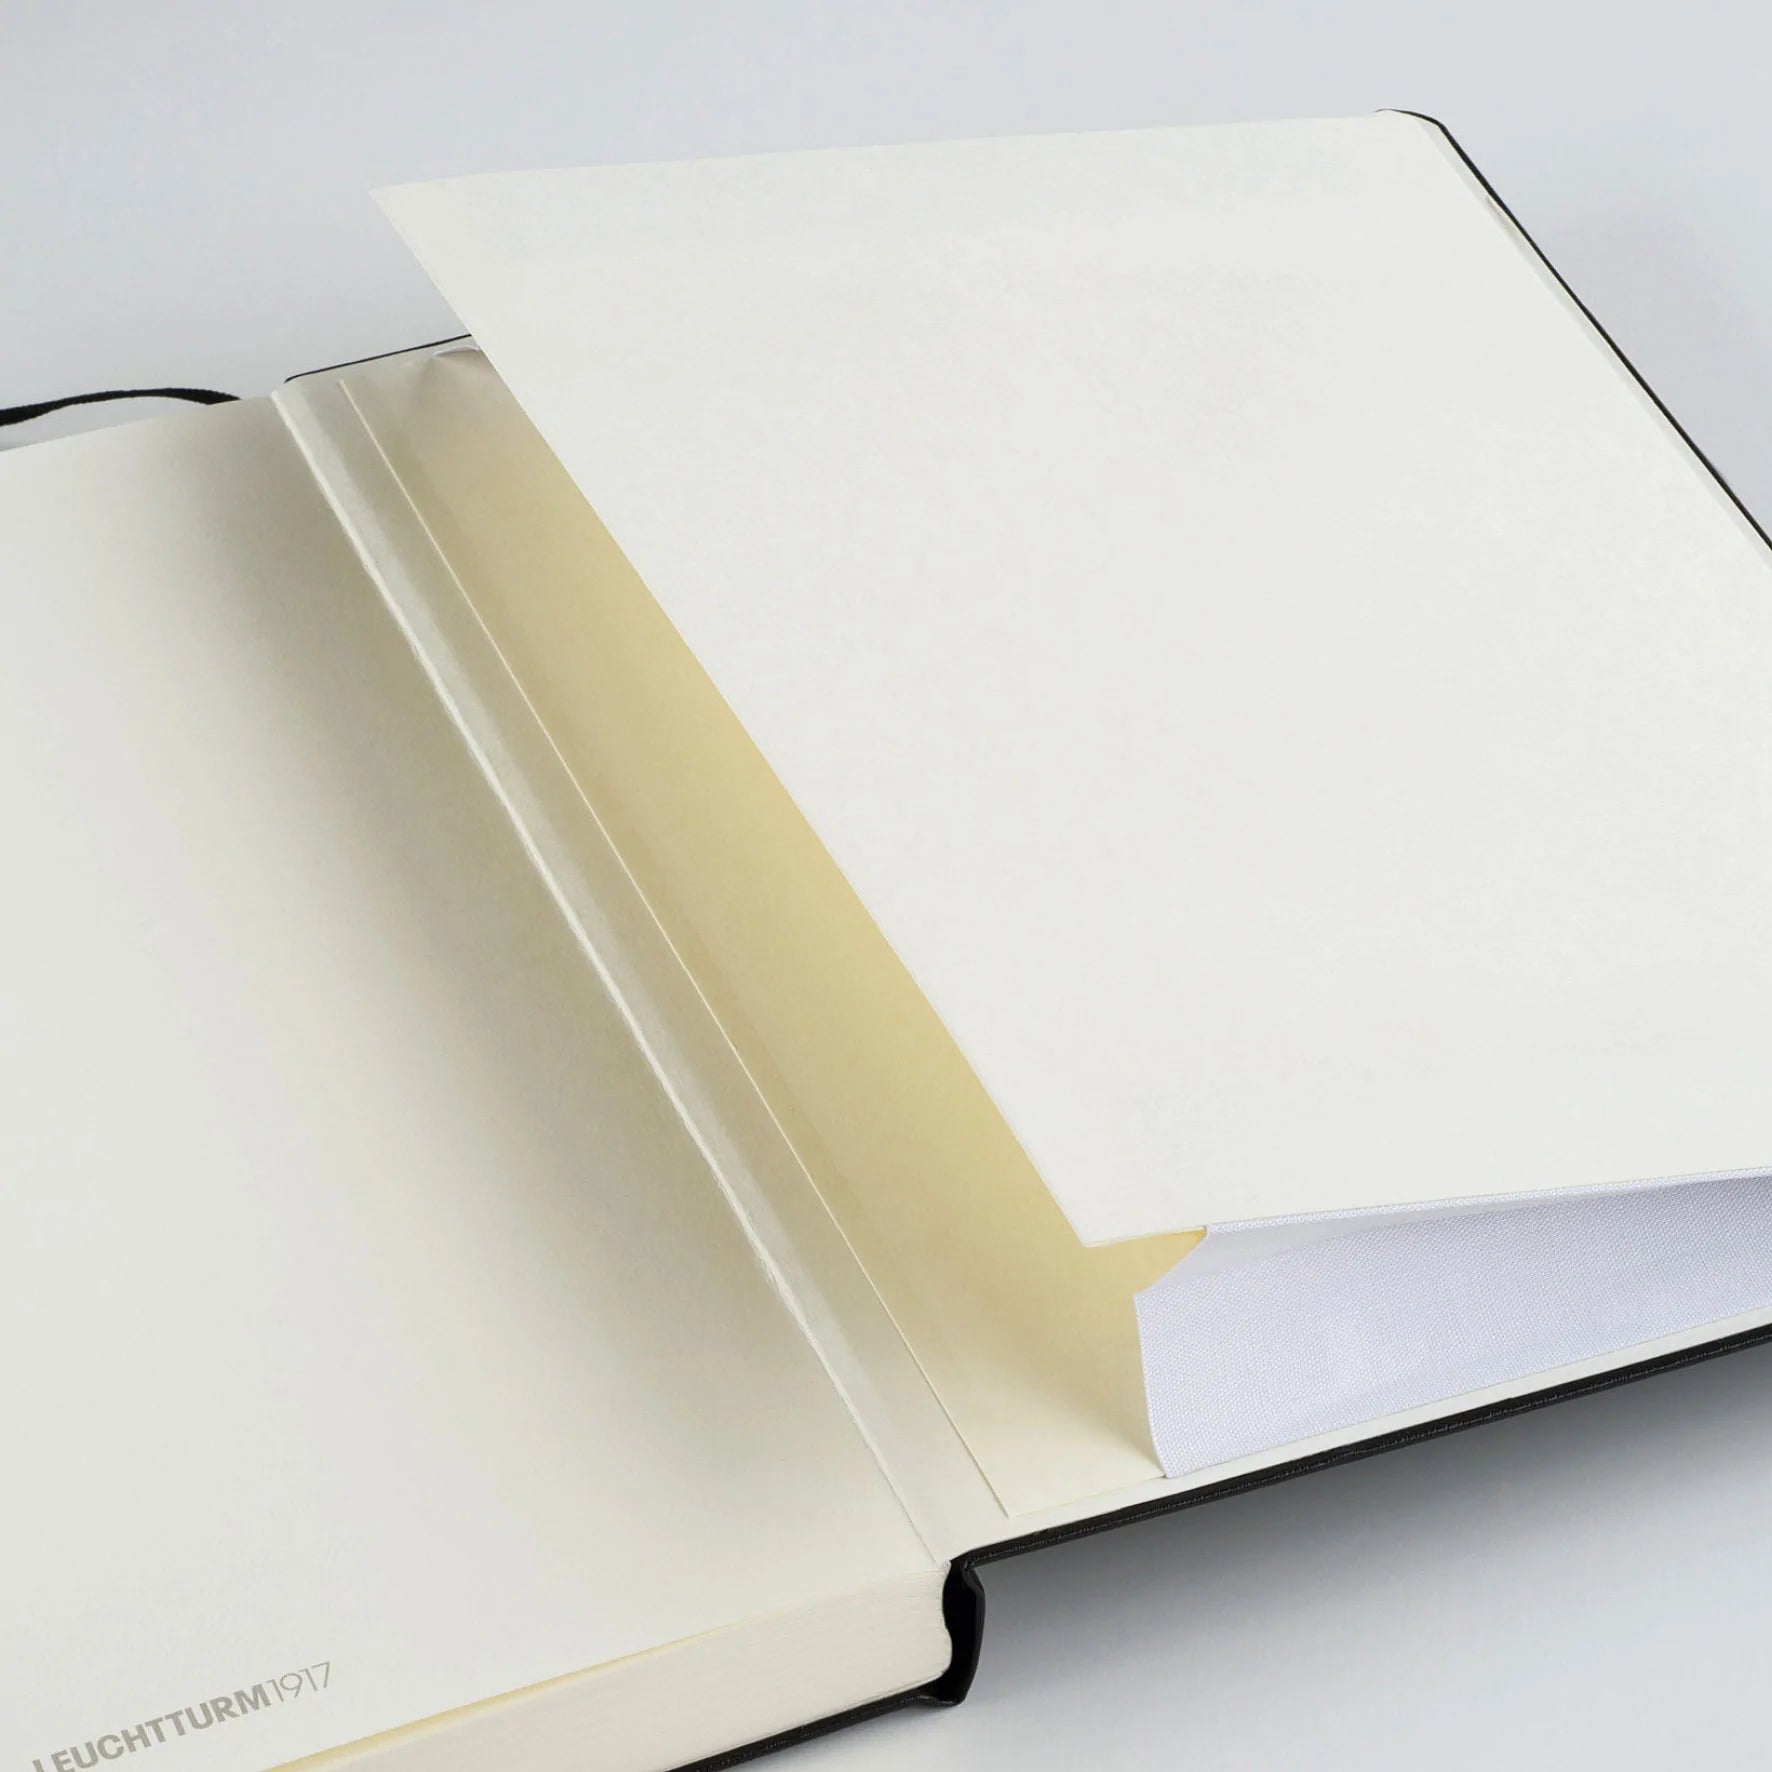 Leuchtturm1917 - Notebook - A5 - Lemon Notebooks The lemon Leuchtturm1917 A5 is a simple yet sophisticated notebook, making it an ideal companion for all walks of life. Leuchtturm1917 notebooks are designed very carefully down to the last detail. The page